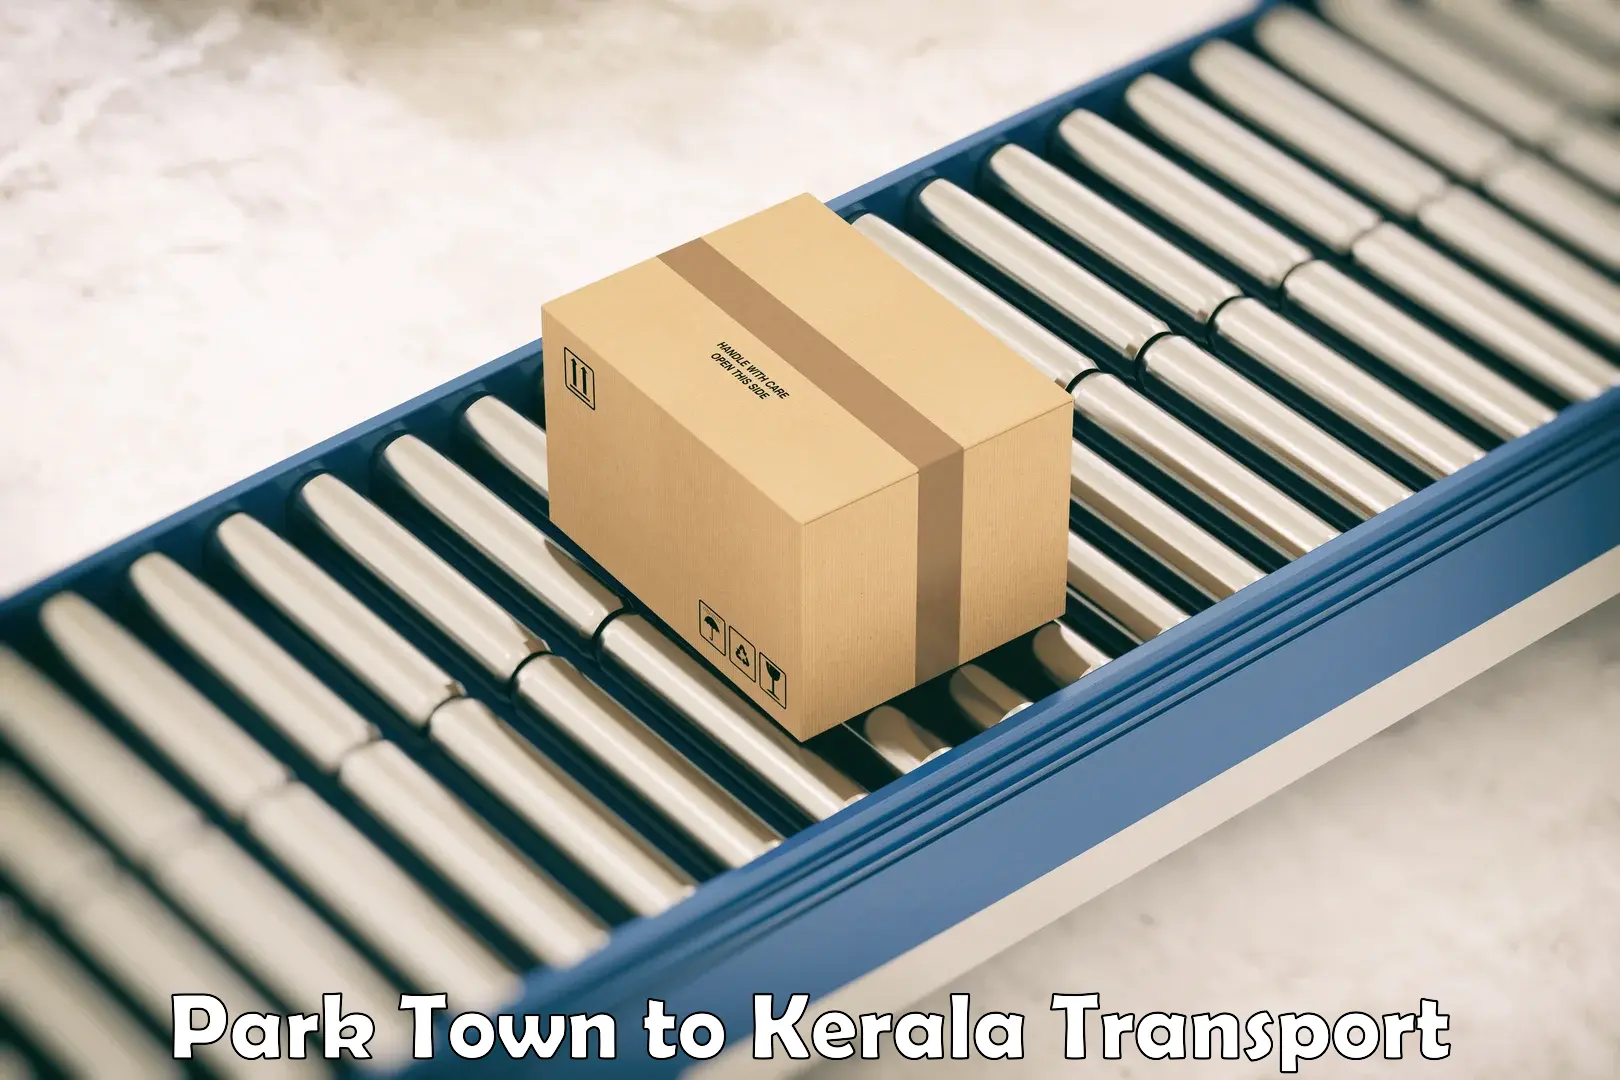 Daily transport service Park Town to Kerala